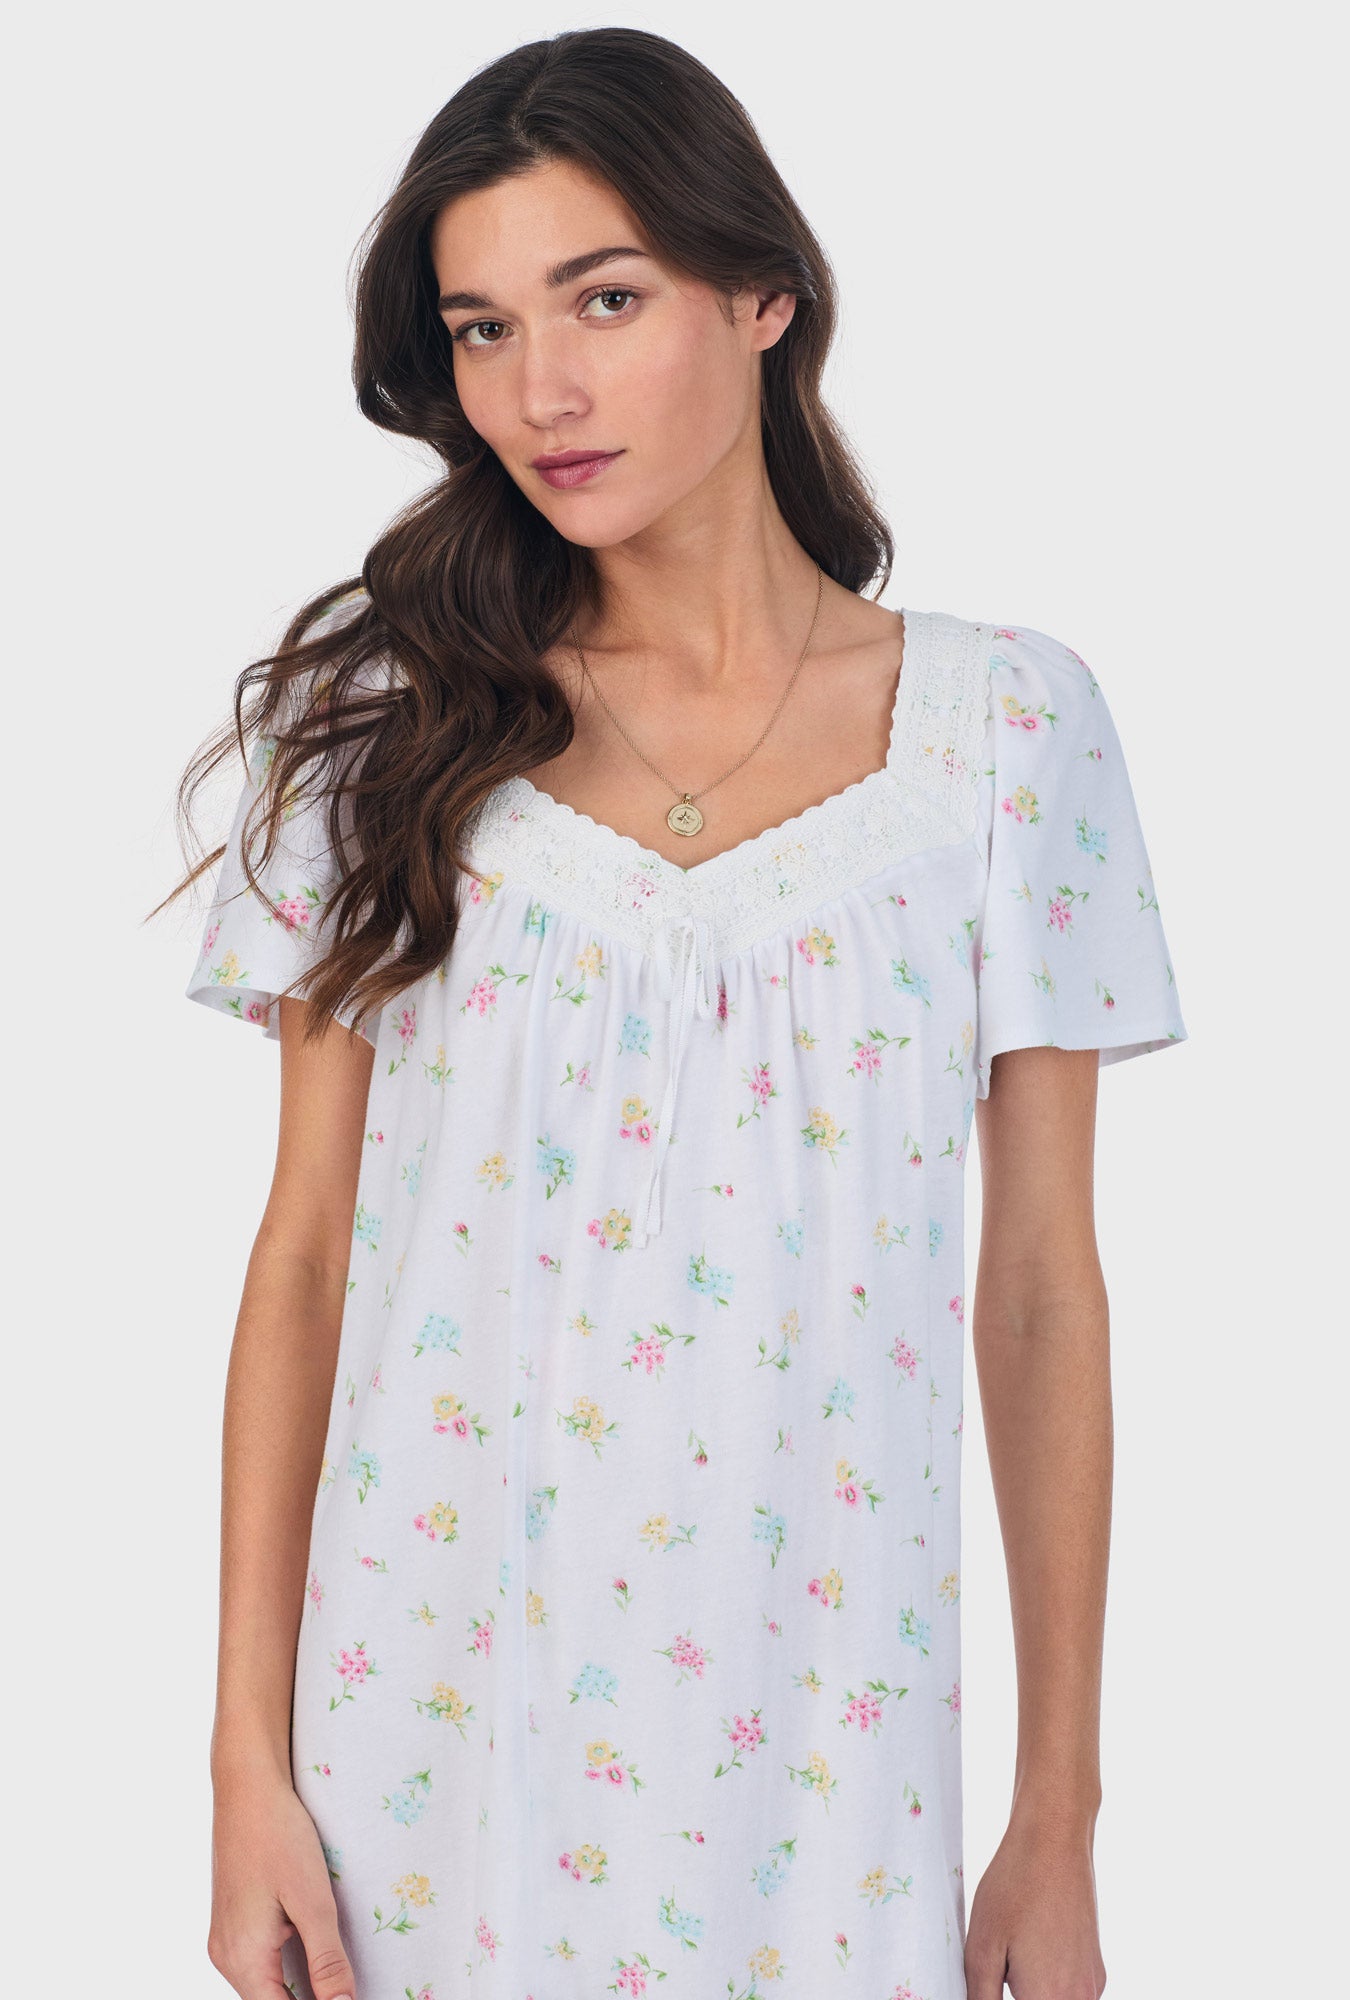 A lady wearing white short Sleeve Cotton Waltz Nightgown with Cottage Bouquet print.